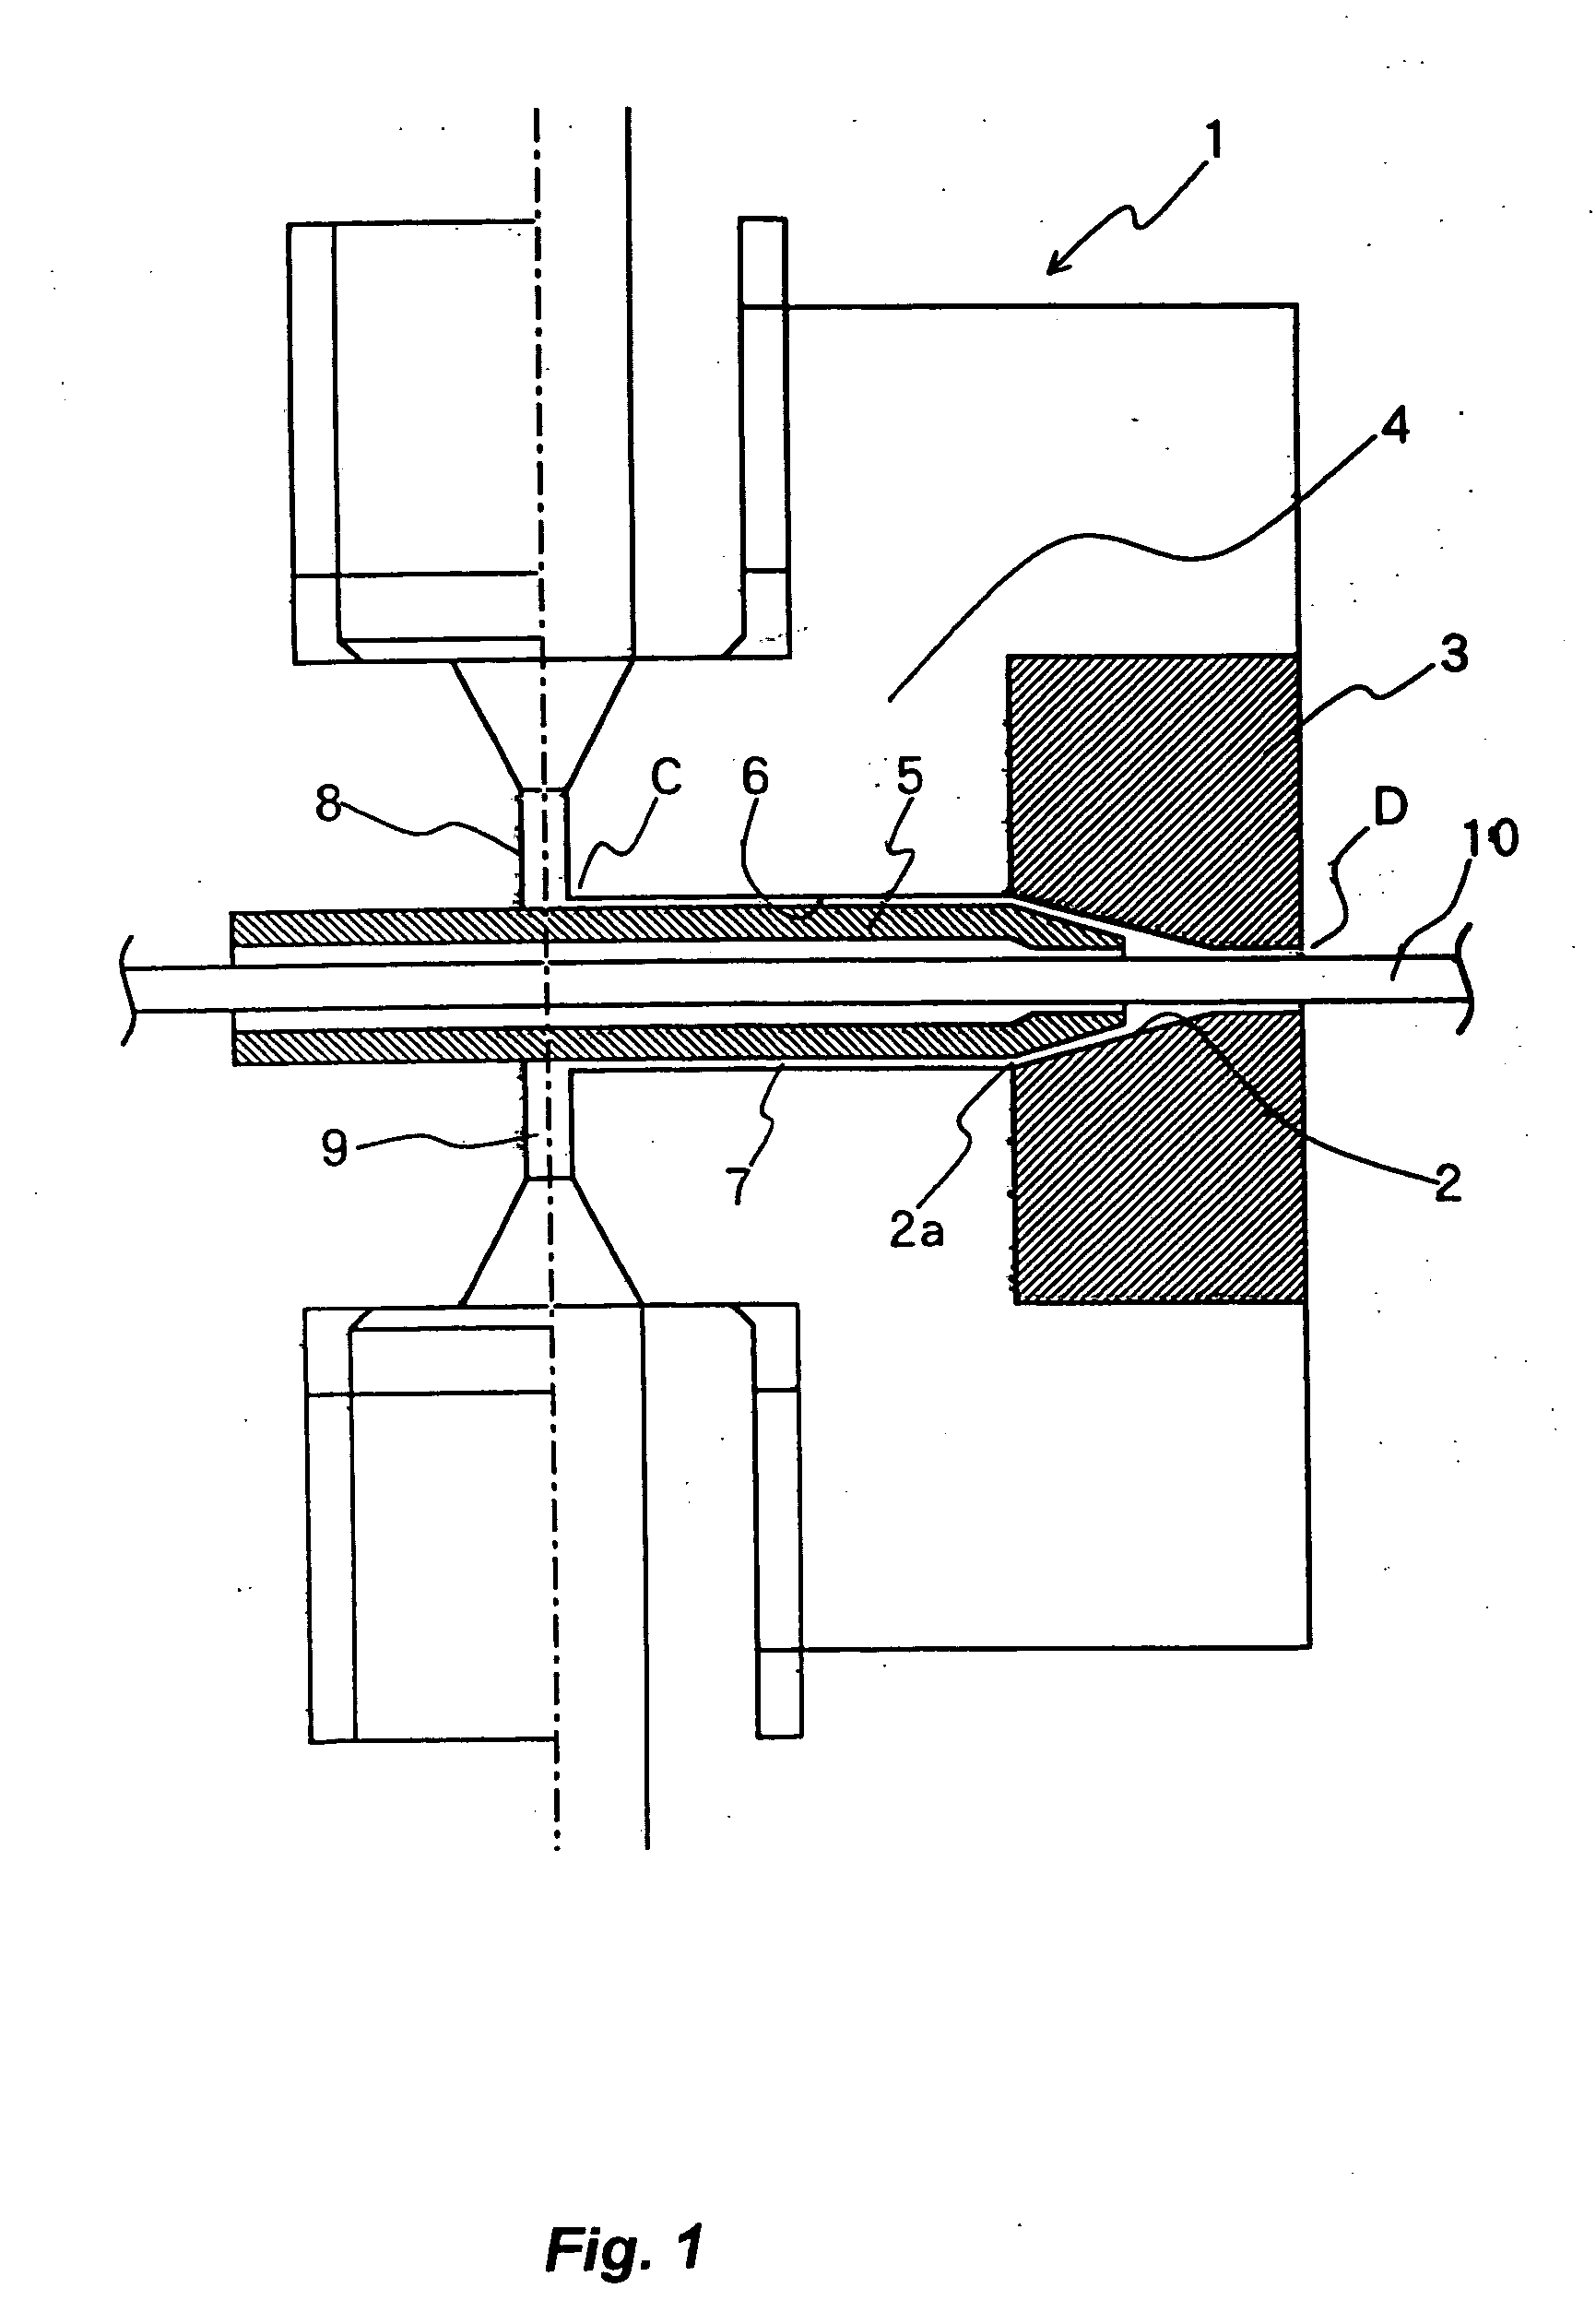 Stiffness-taper tubing and the manufacturing method, and manufacturing apparatus for such tubing